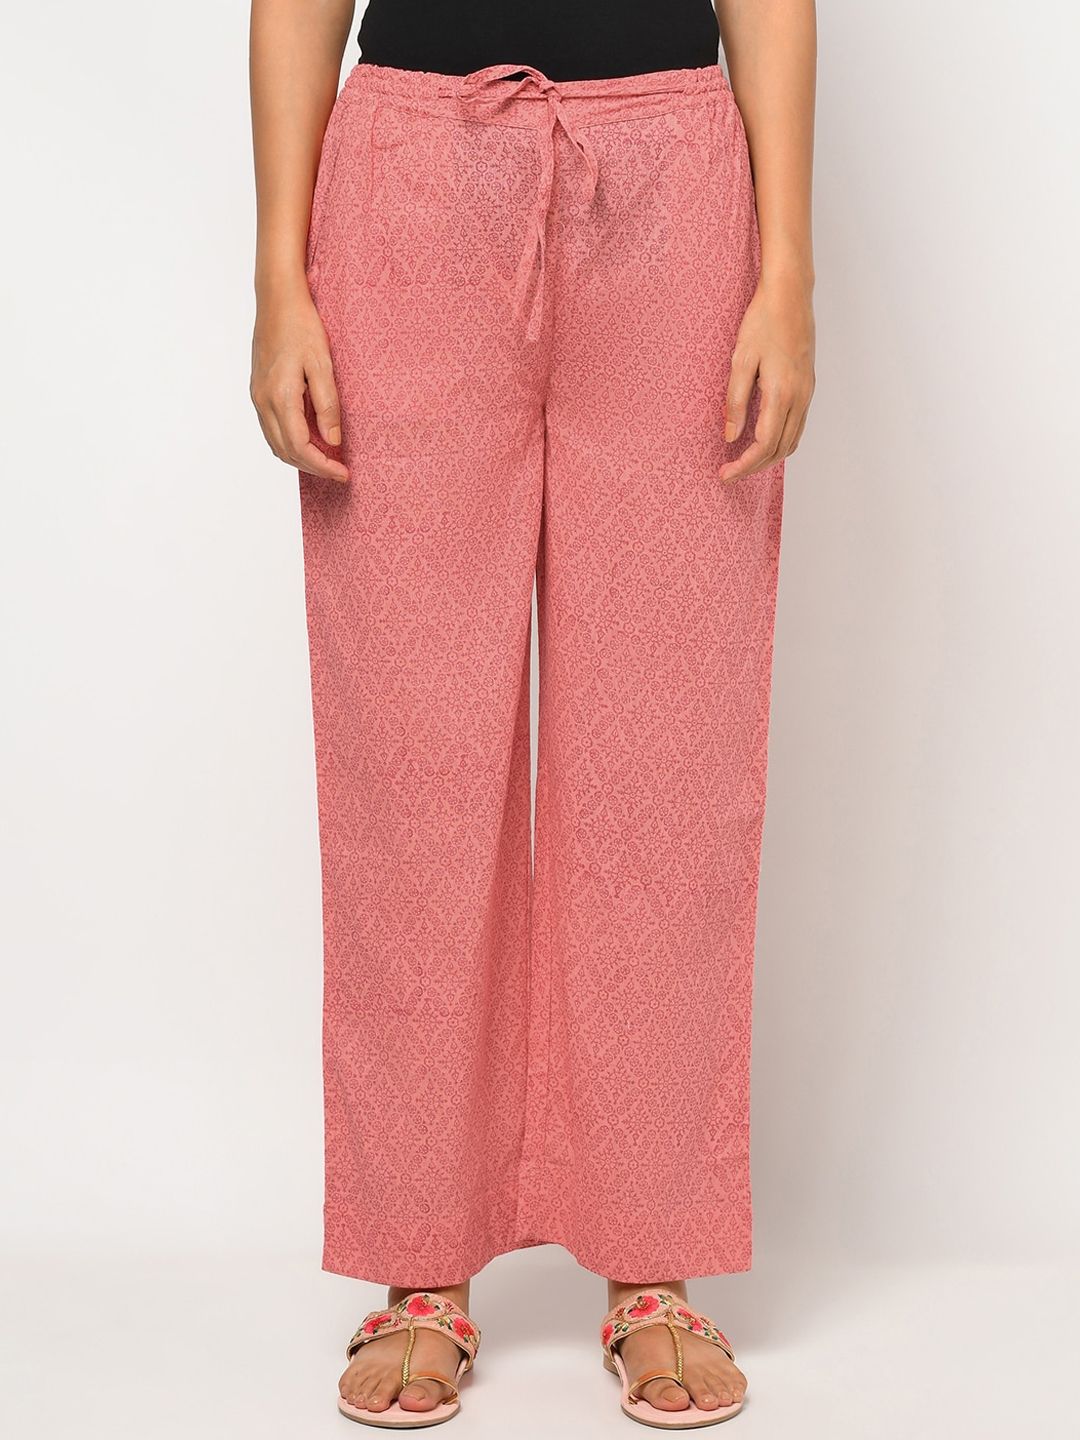 Fabindia Women Pink Printed Parallel Trousers Price in India